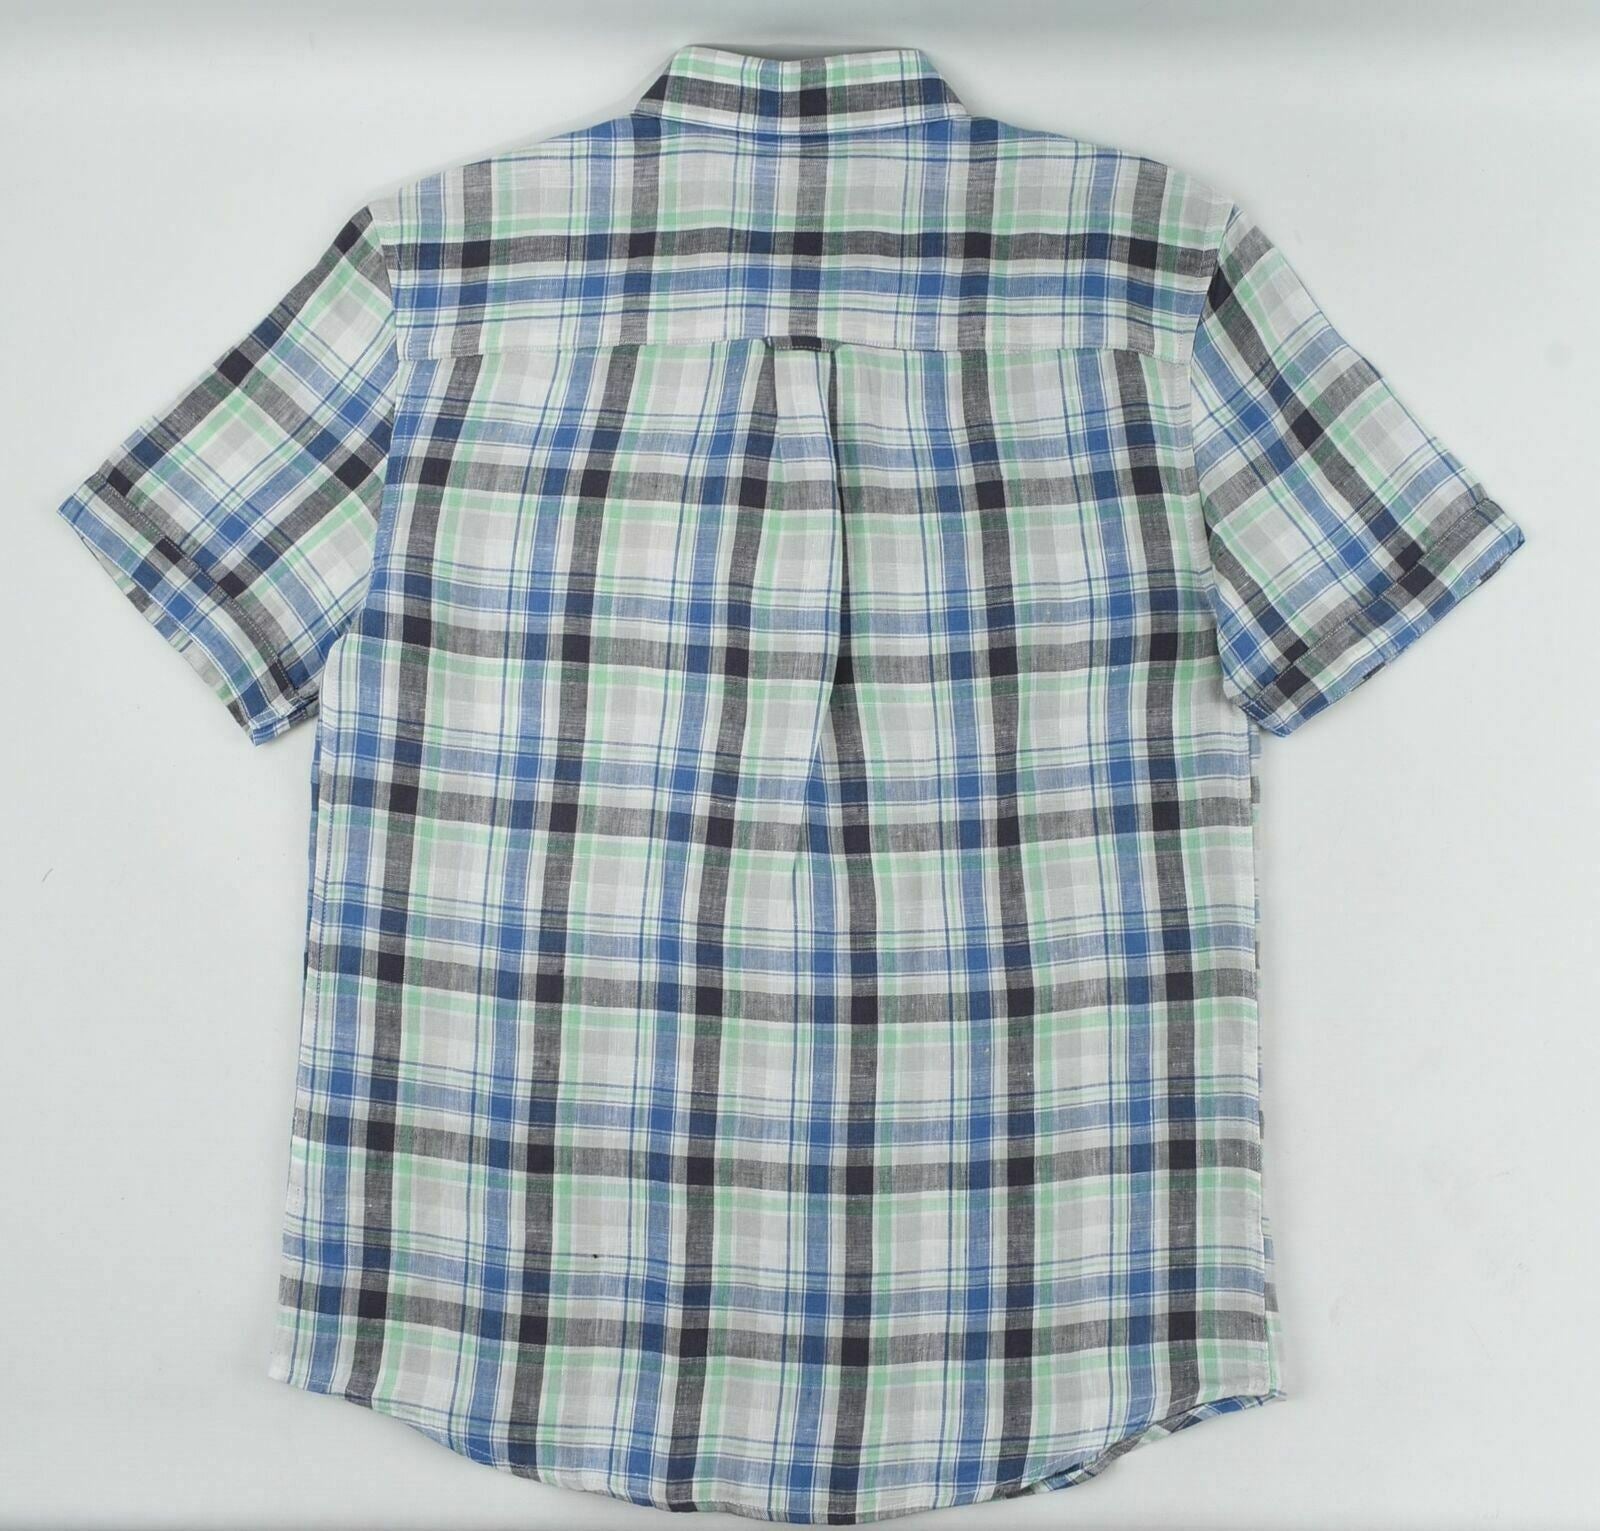 RACING GREEN Men's Checked Pattern Short Sleeve Shirt Size S